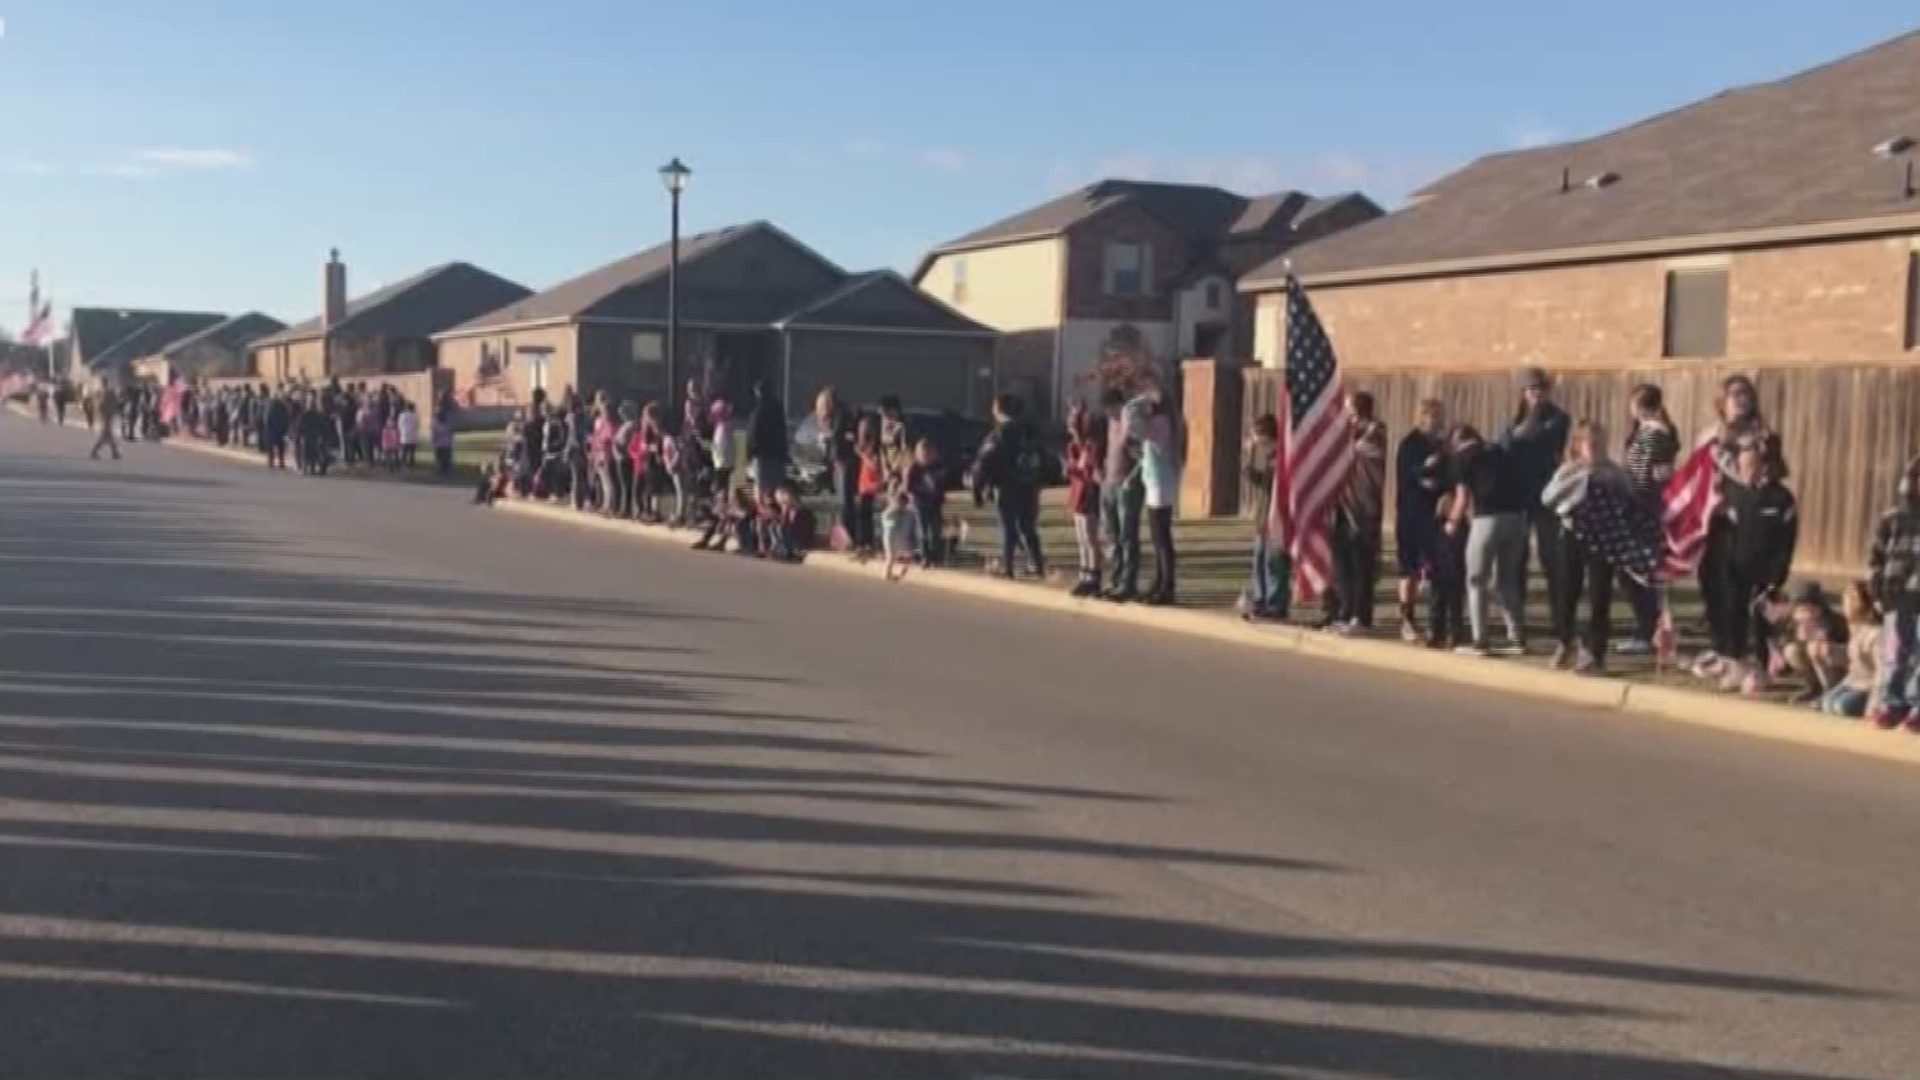 The Central Texas community honored two Fort Hood soldiers who were killed in Afghanistan with a special surprise for their widows.